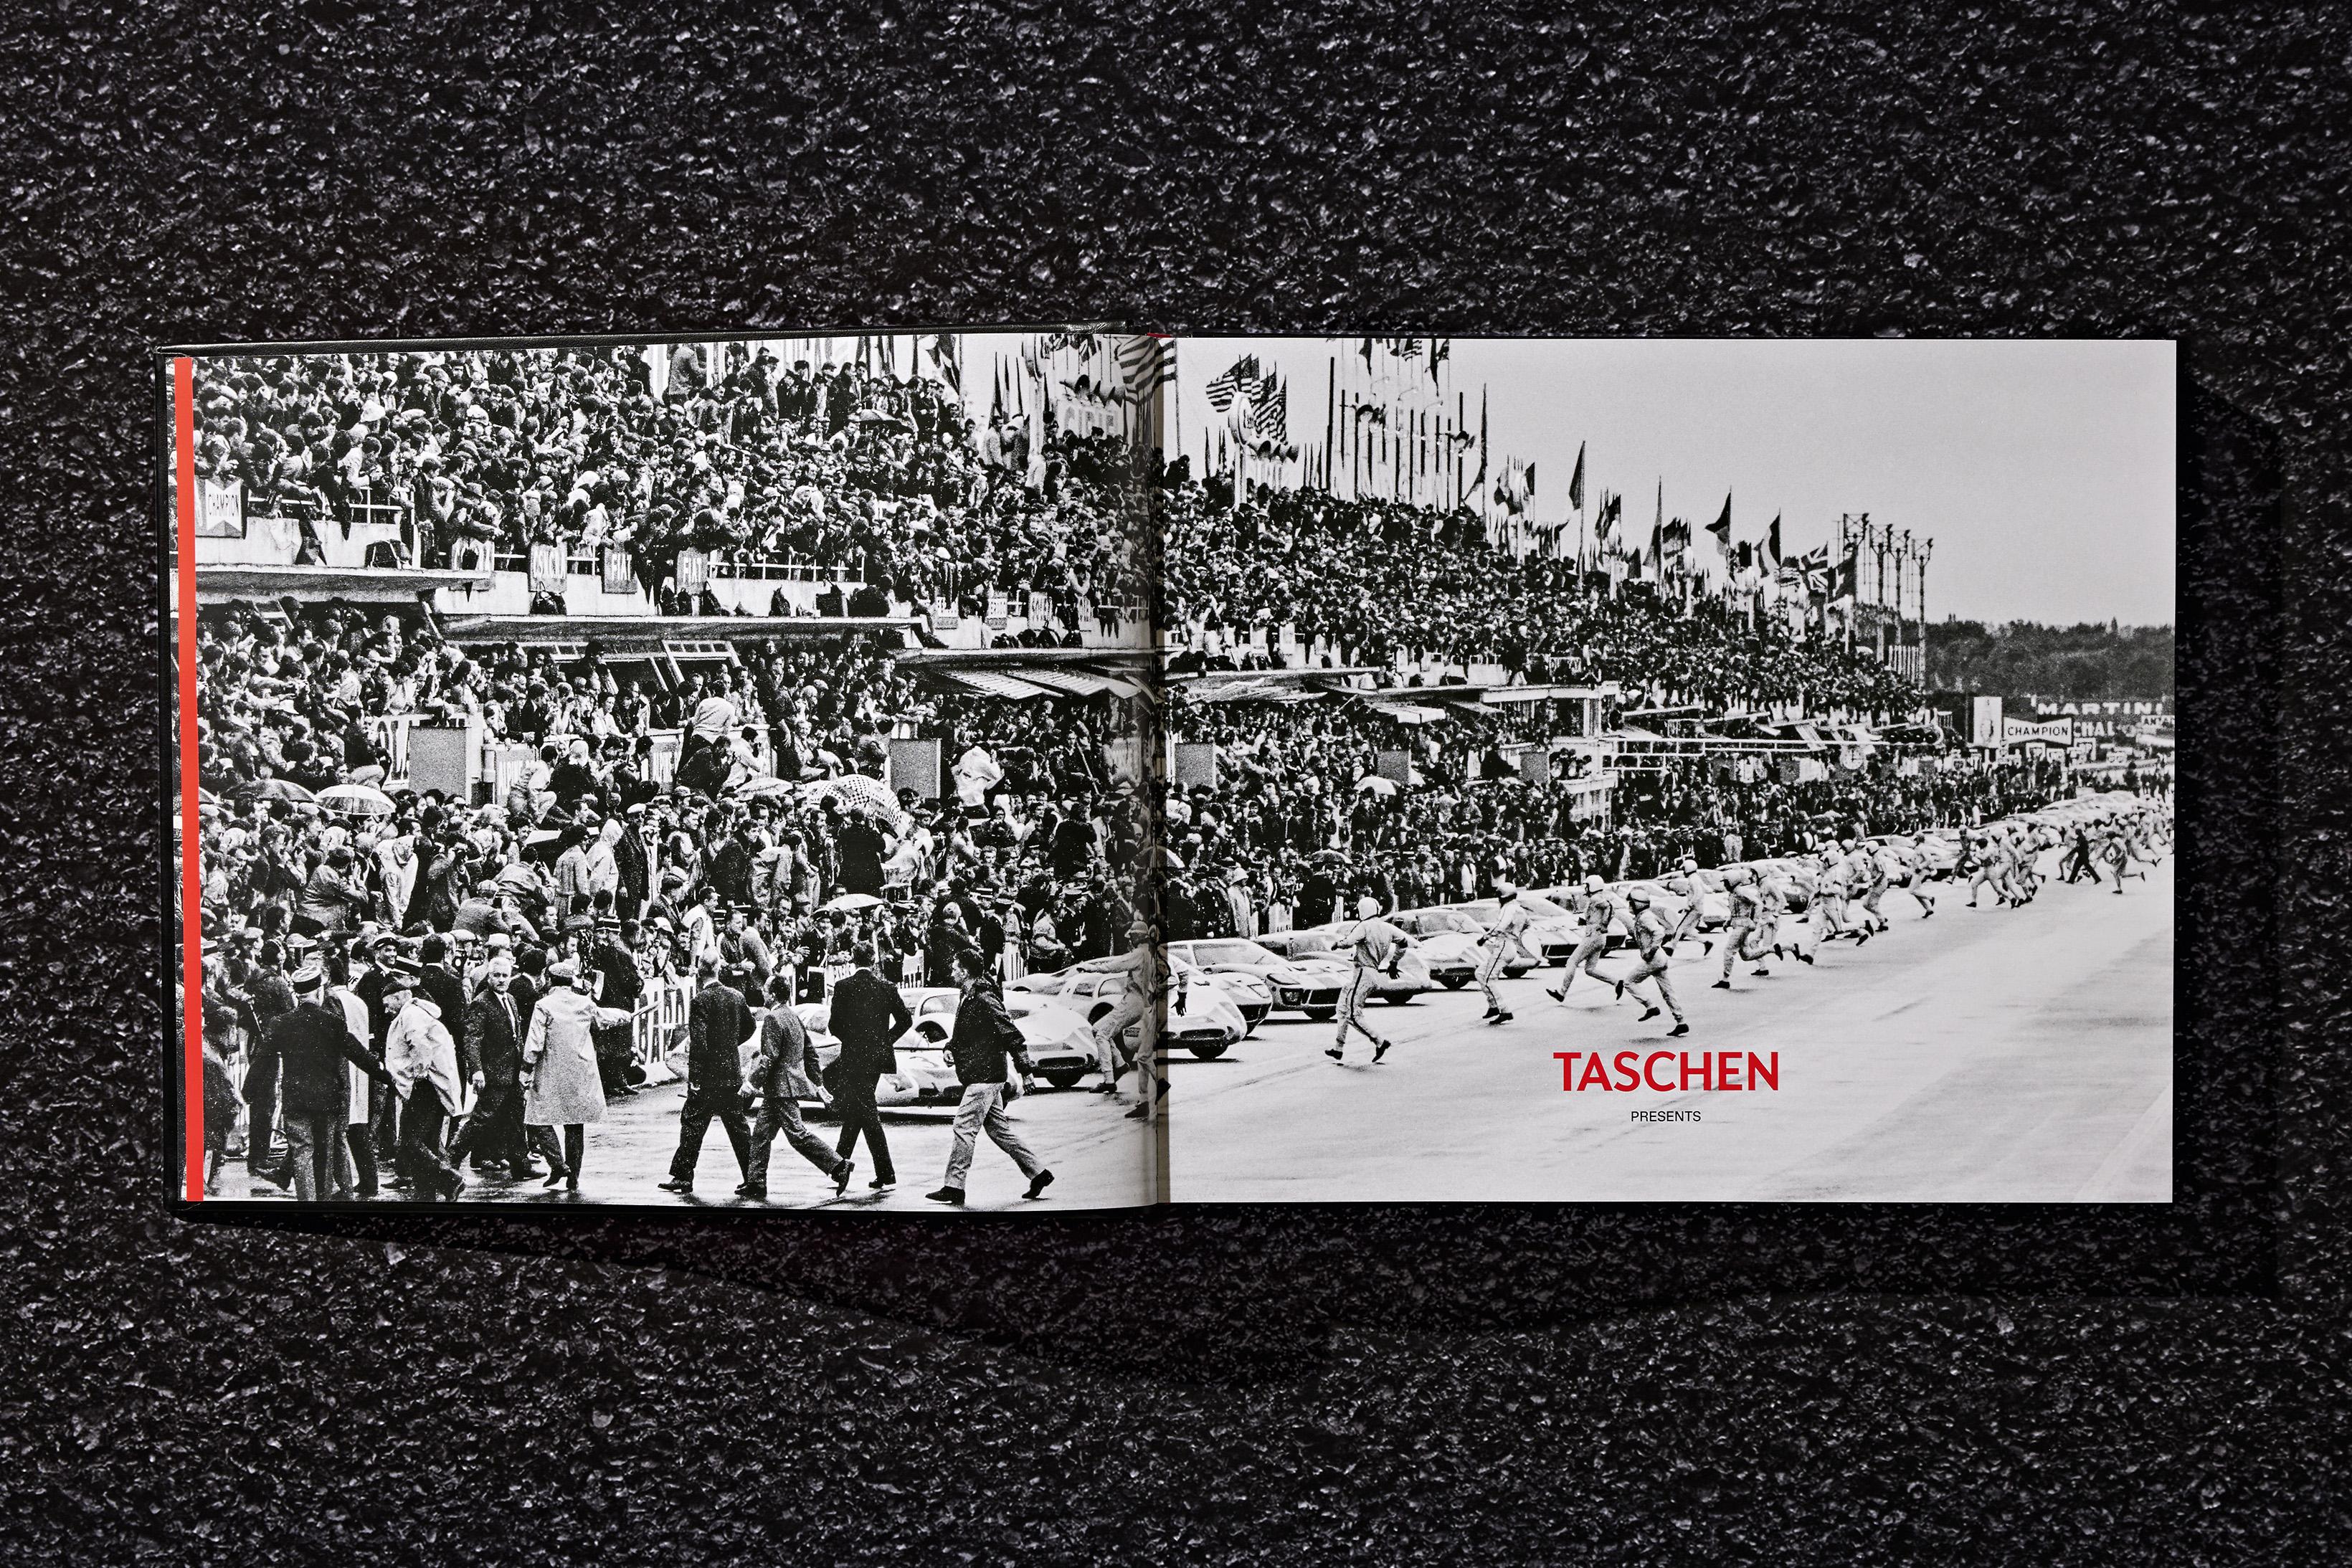 Aluminum Rainer W. Schlegelmilch. Porsche Racing Moments. Limited, Signed book with stand